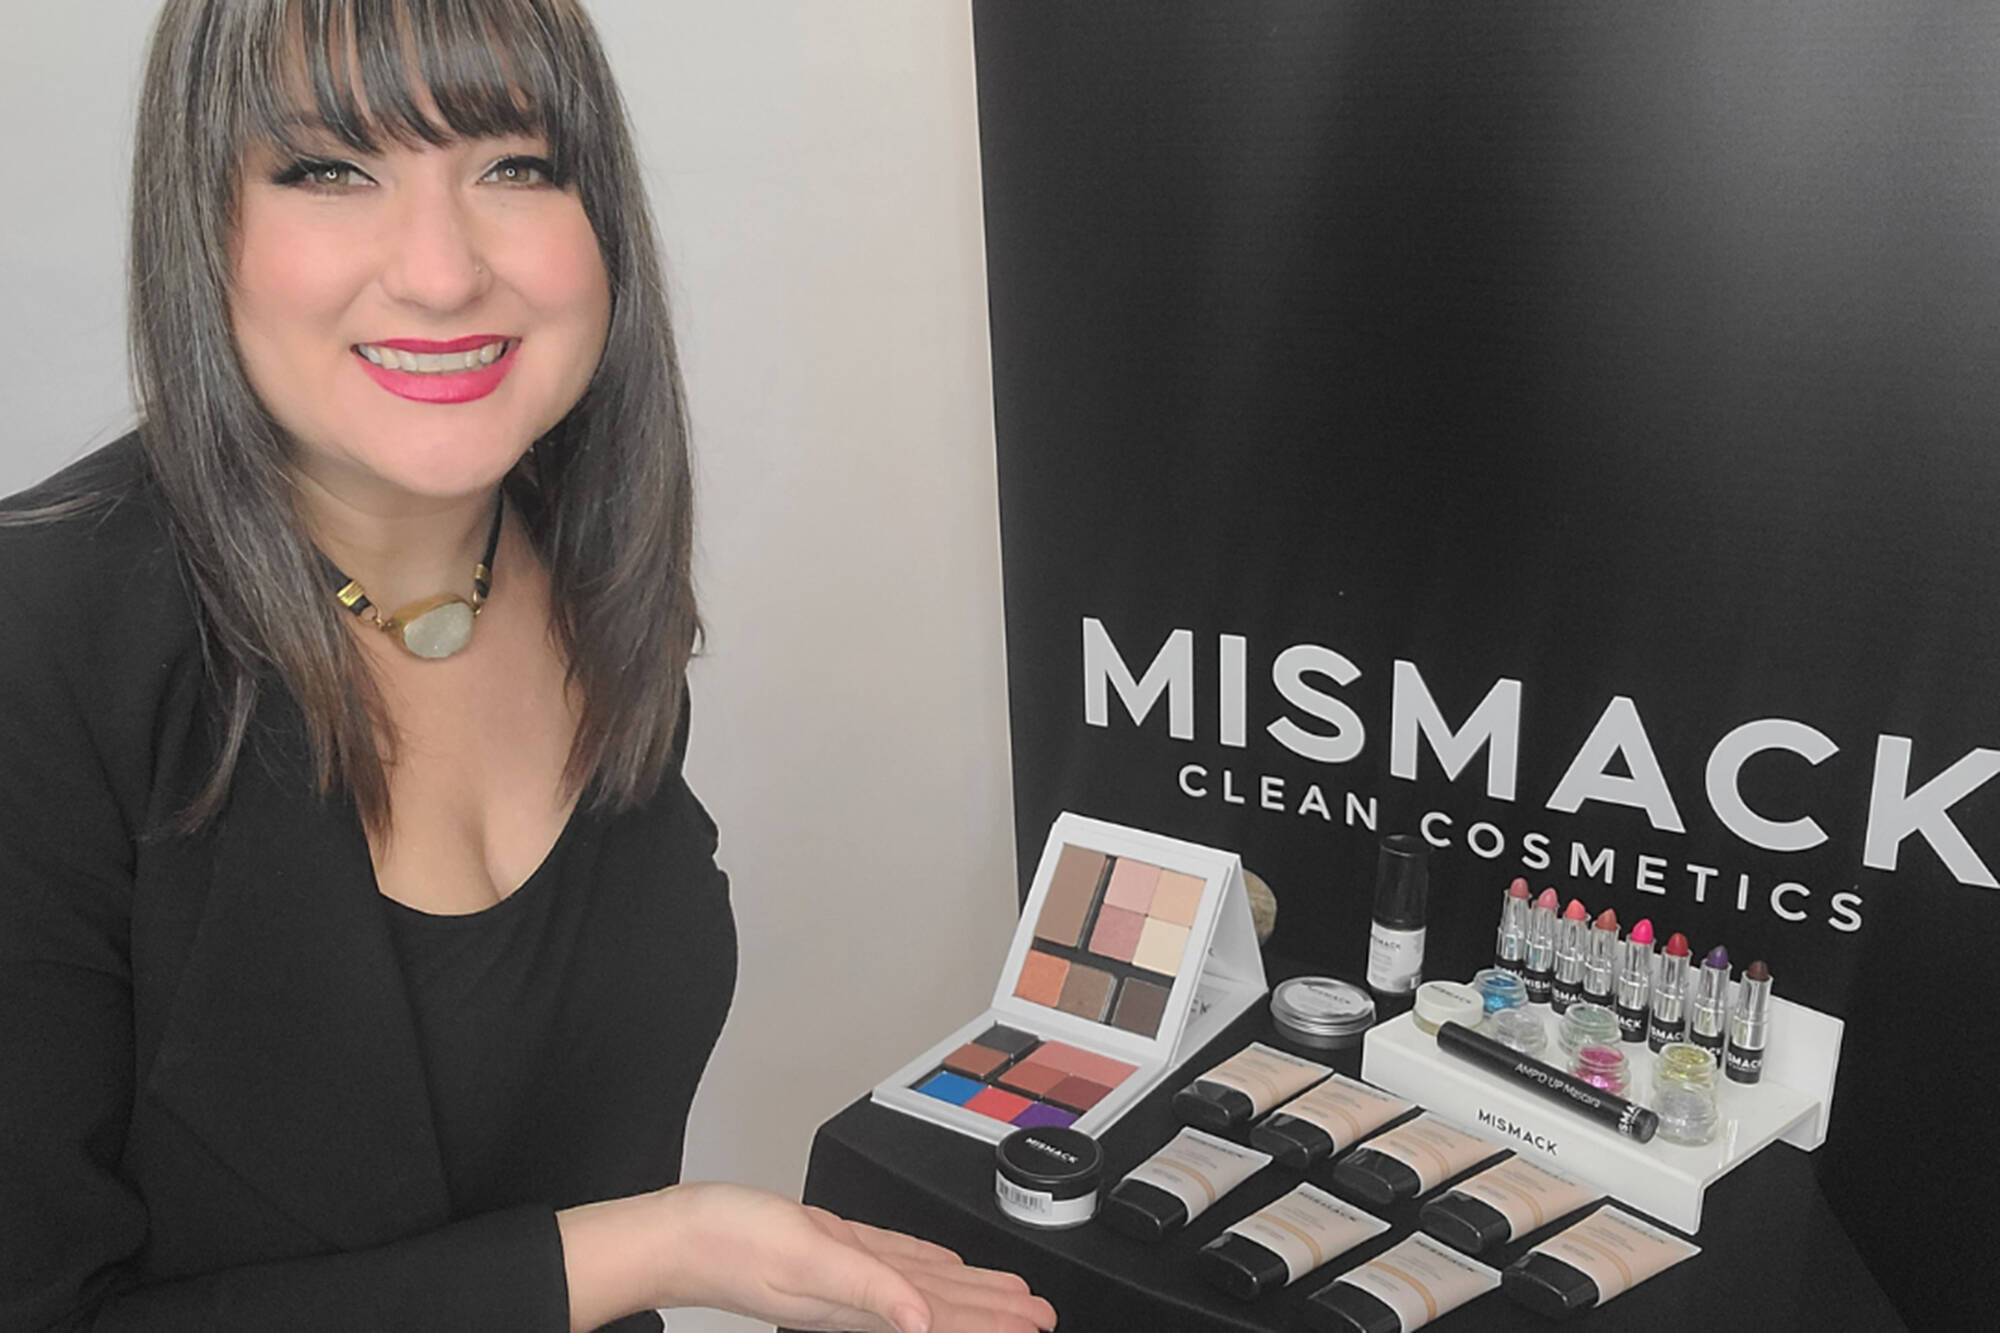 MisMacK Clean Cosmetics, founded by Missy MacKintosh, and Trilogy Solutions are nominated for B.C. Small Business Awards. (Black Press file photo)